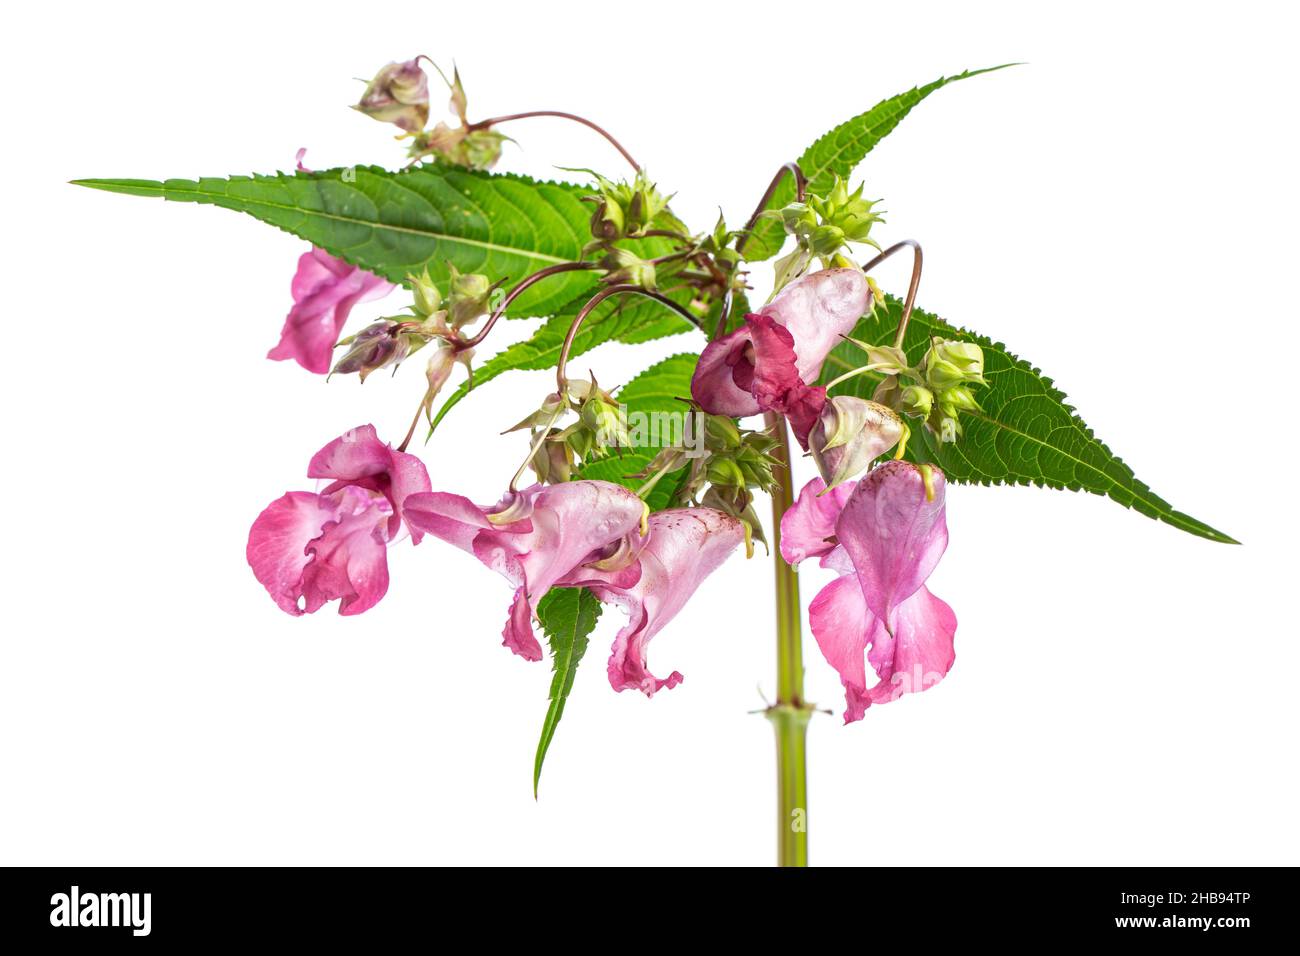 Balsam, Himalayan, white, background, Indian, Balsam, Himalayan, neophyte, Plant released, Cut, isolated, white, details, flower, leaves, detail, purp Stock Photo